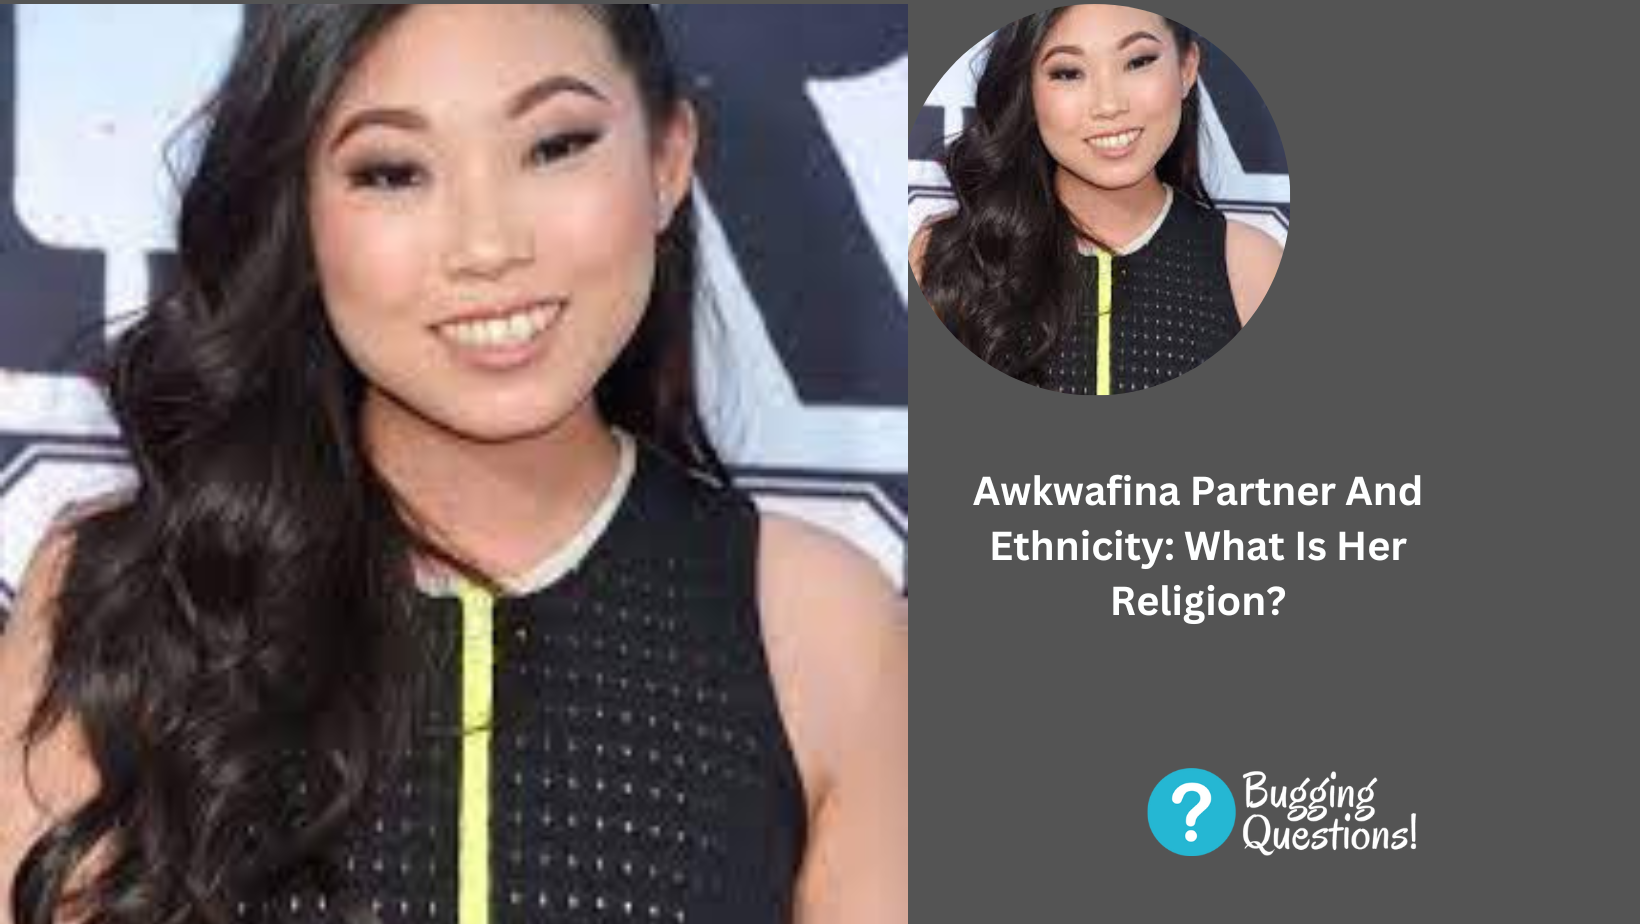 Awkwafina Partner And Ethnicity: What Is Her Religion?